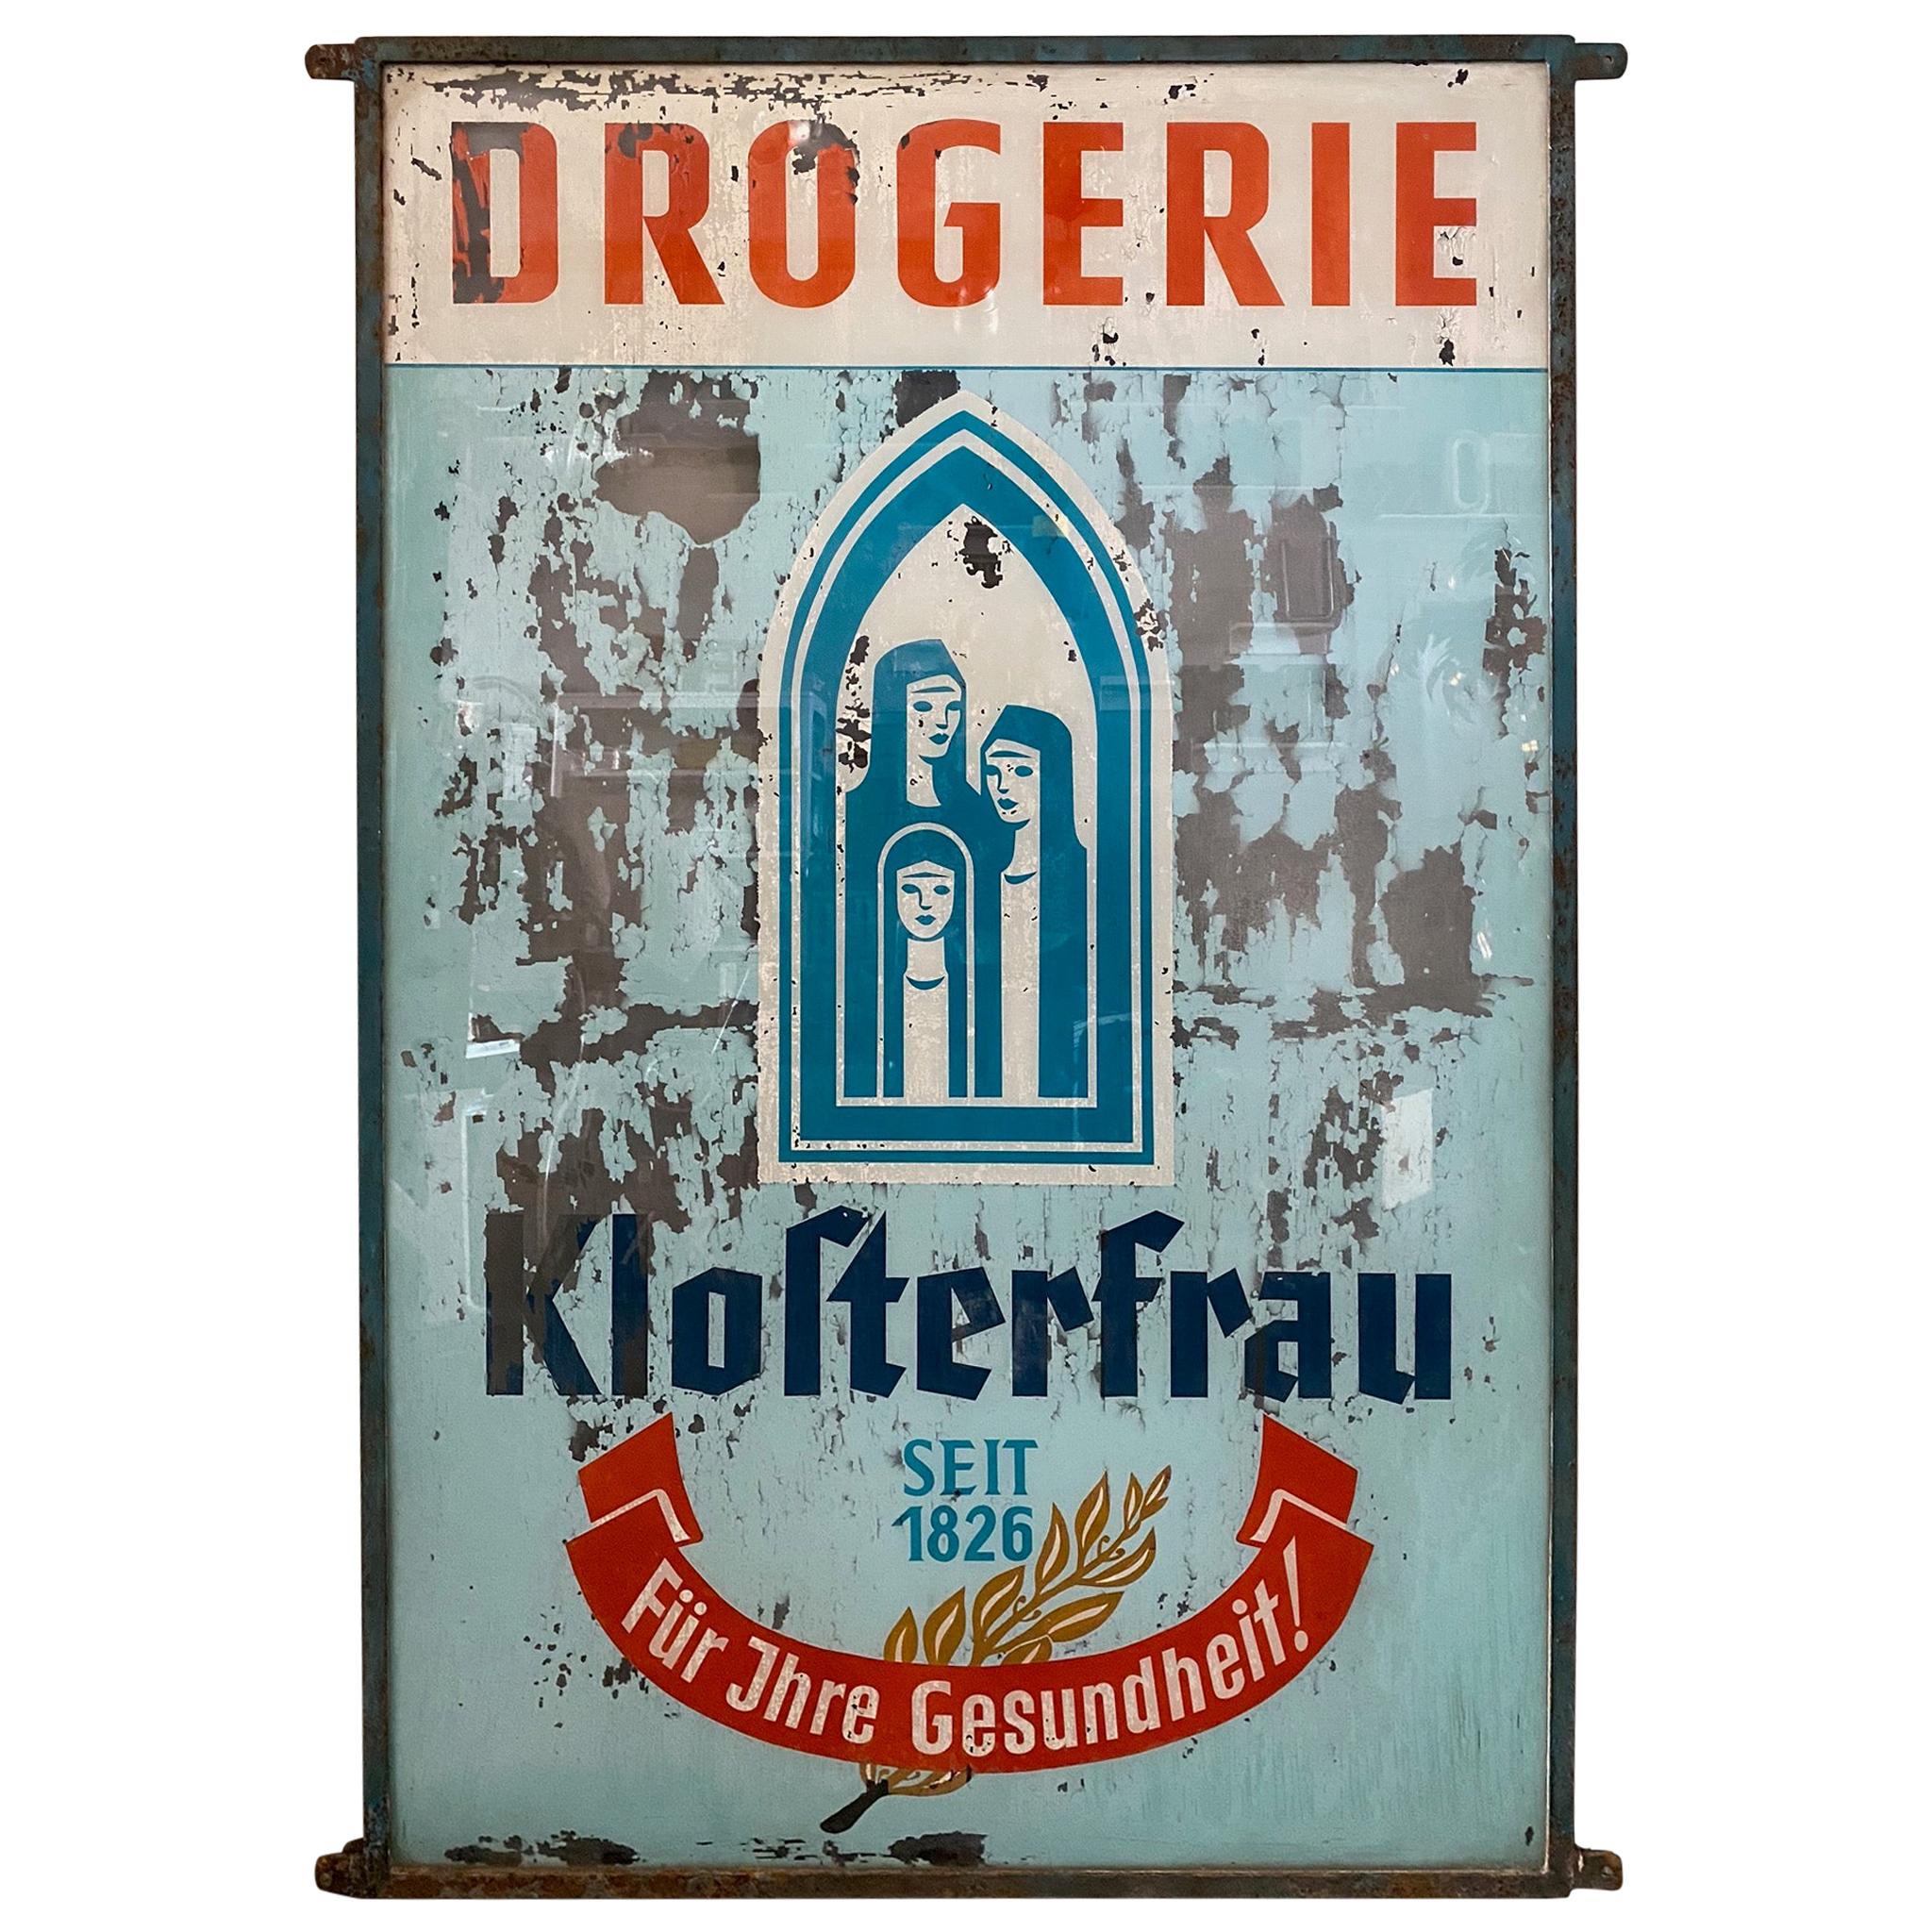 Old Drugstore Advertisement for "Klosterfrau", 1920s, Glass Pharmacie Sign